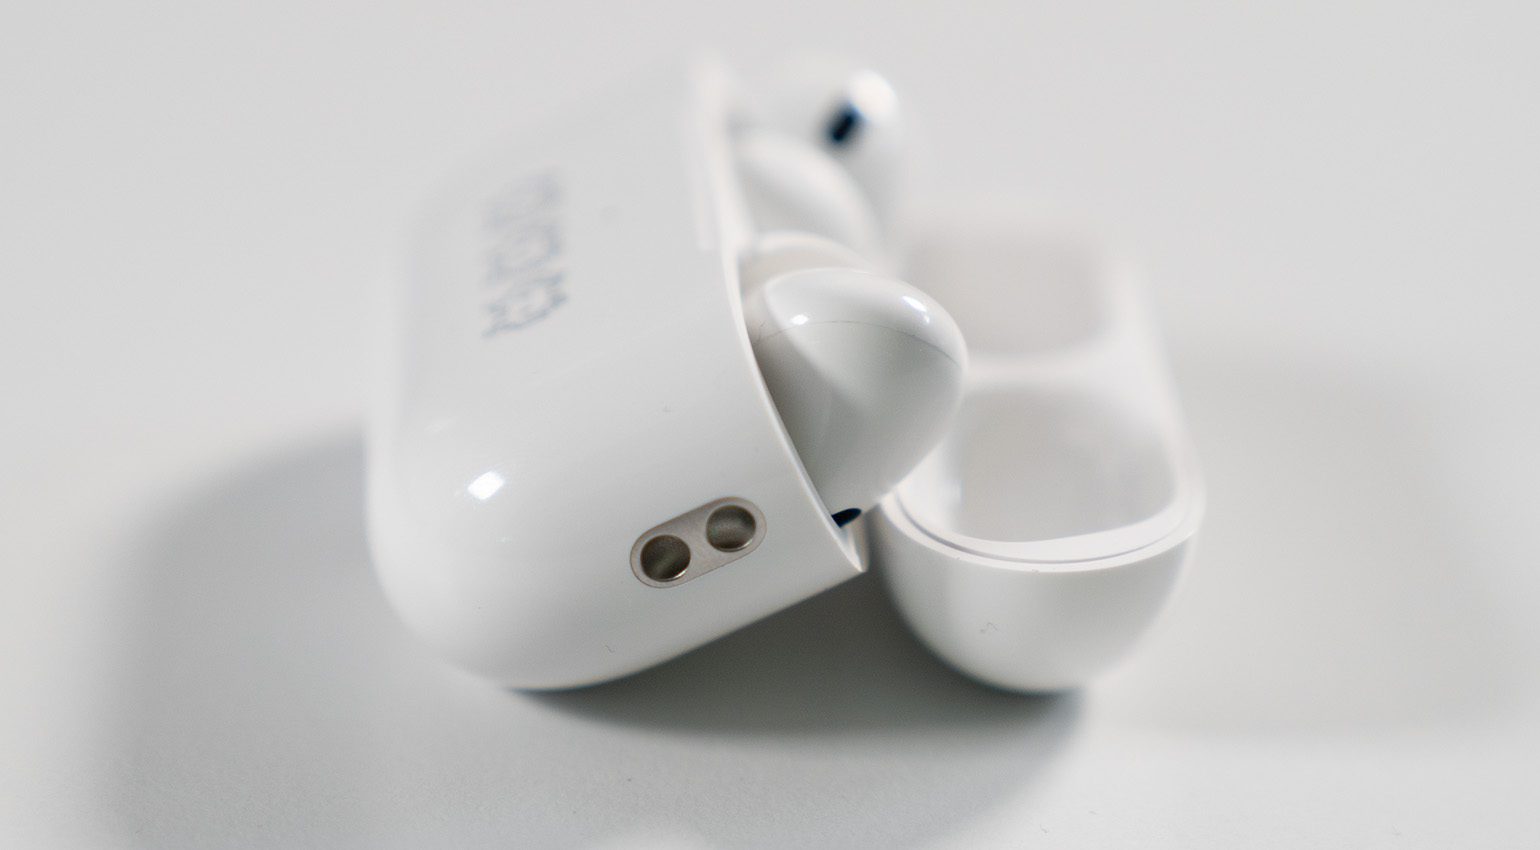 Review: Apple AirPods Pro 2. Generation In-Ear Headphones